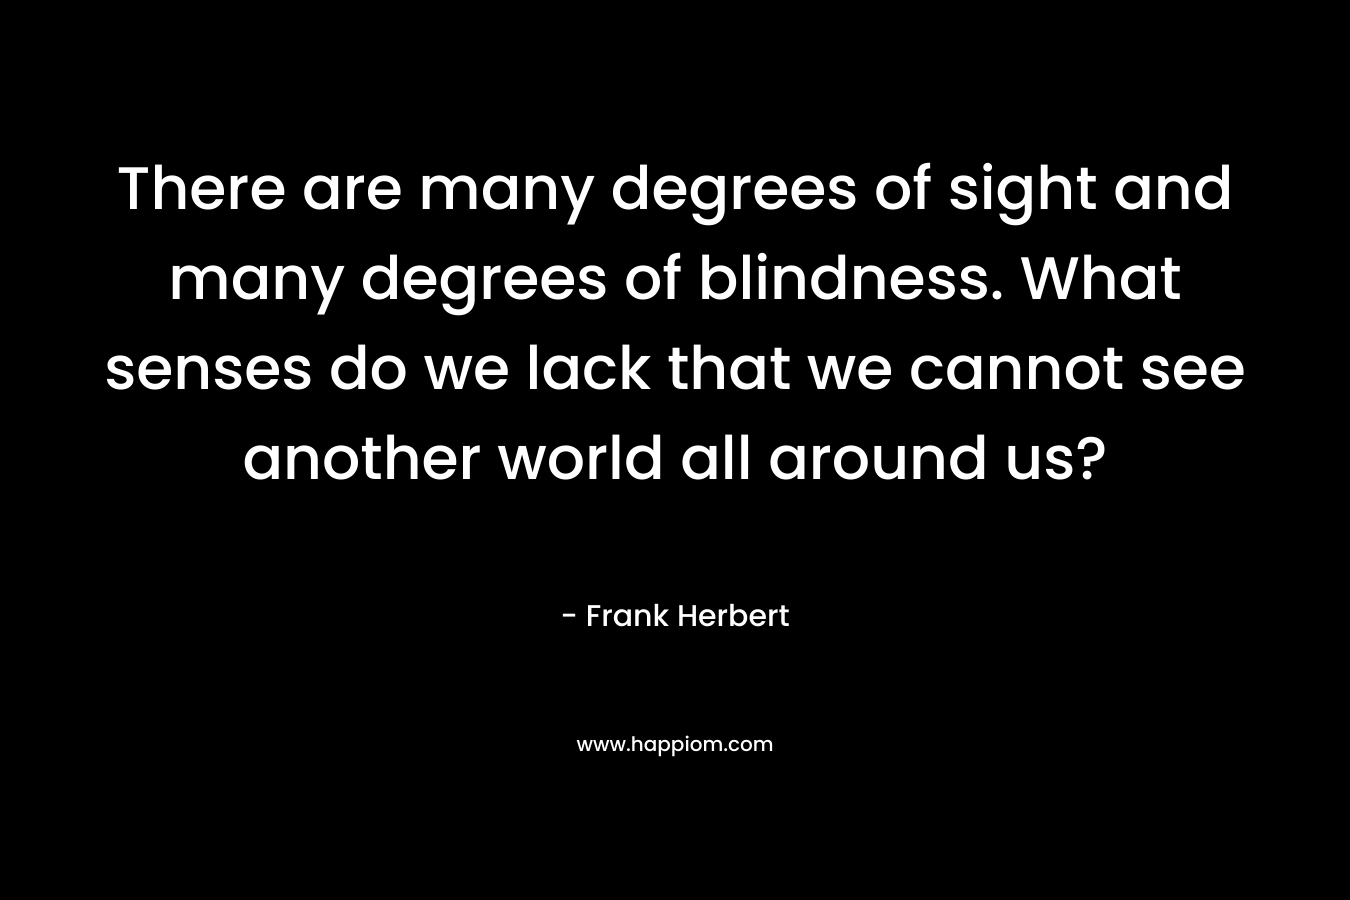 There are many degrees of sight and many degrees of blindness. What senses do we lack that we cannot see another world all around us? – Frank Herbert